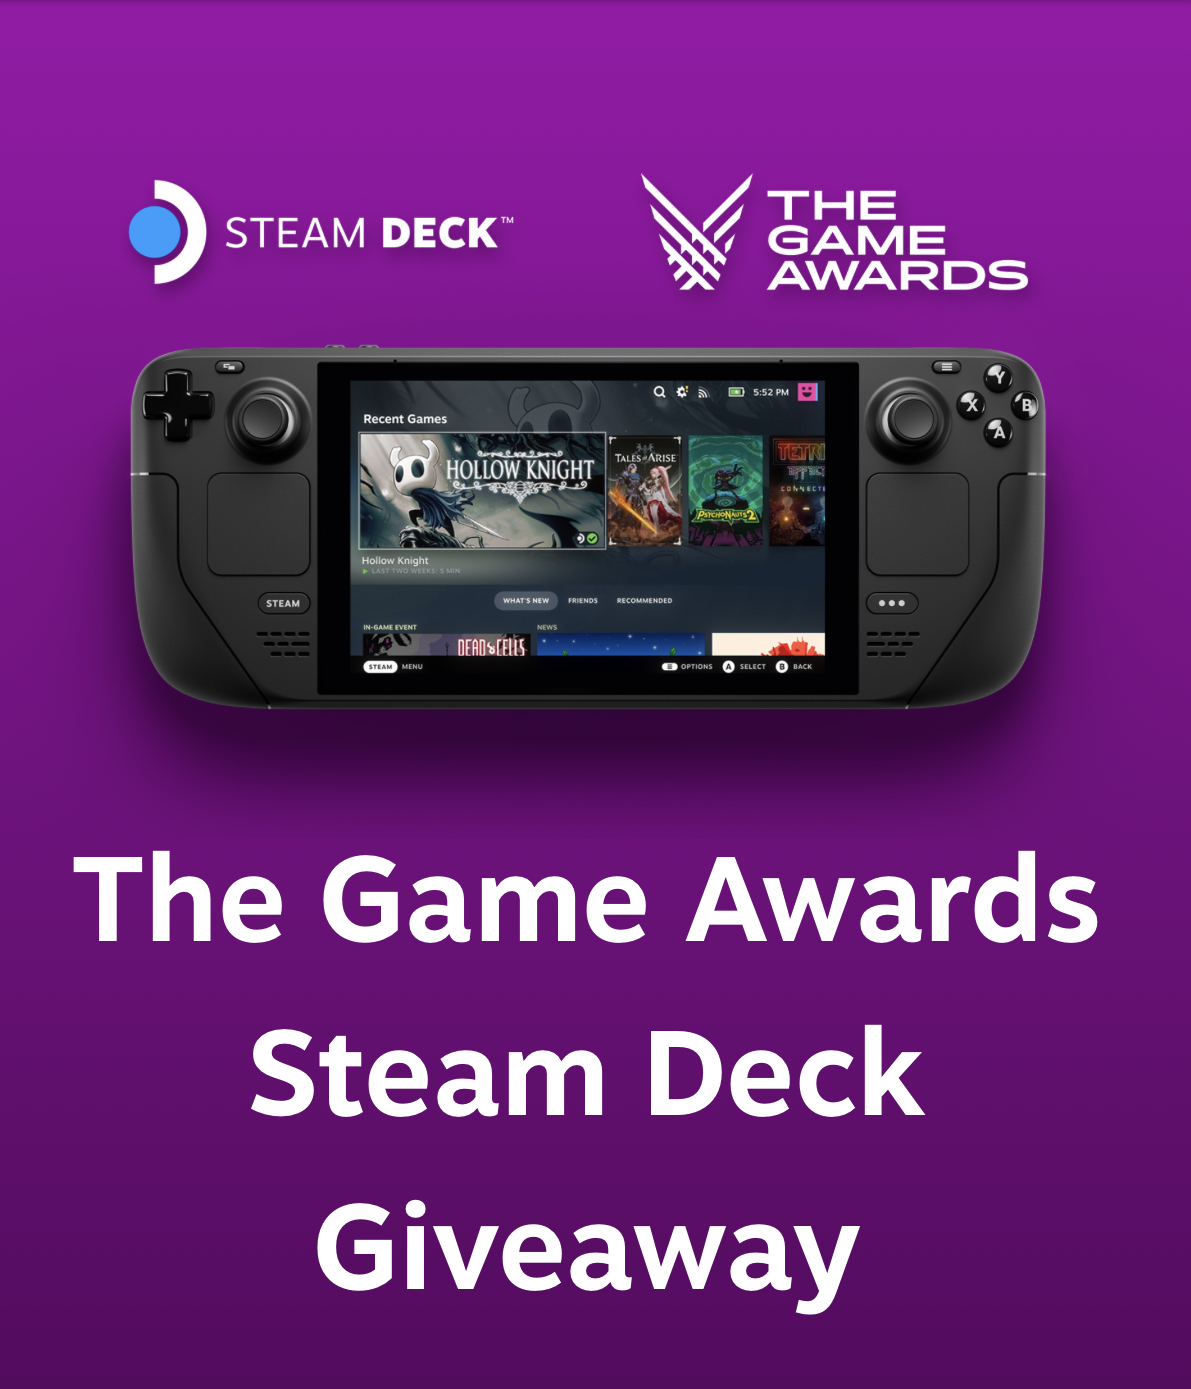 Win a Steam Deck During The Game Awards! Steam Deck HQ